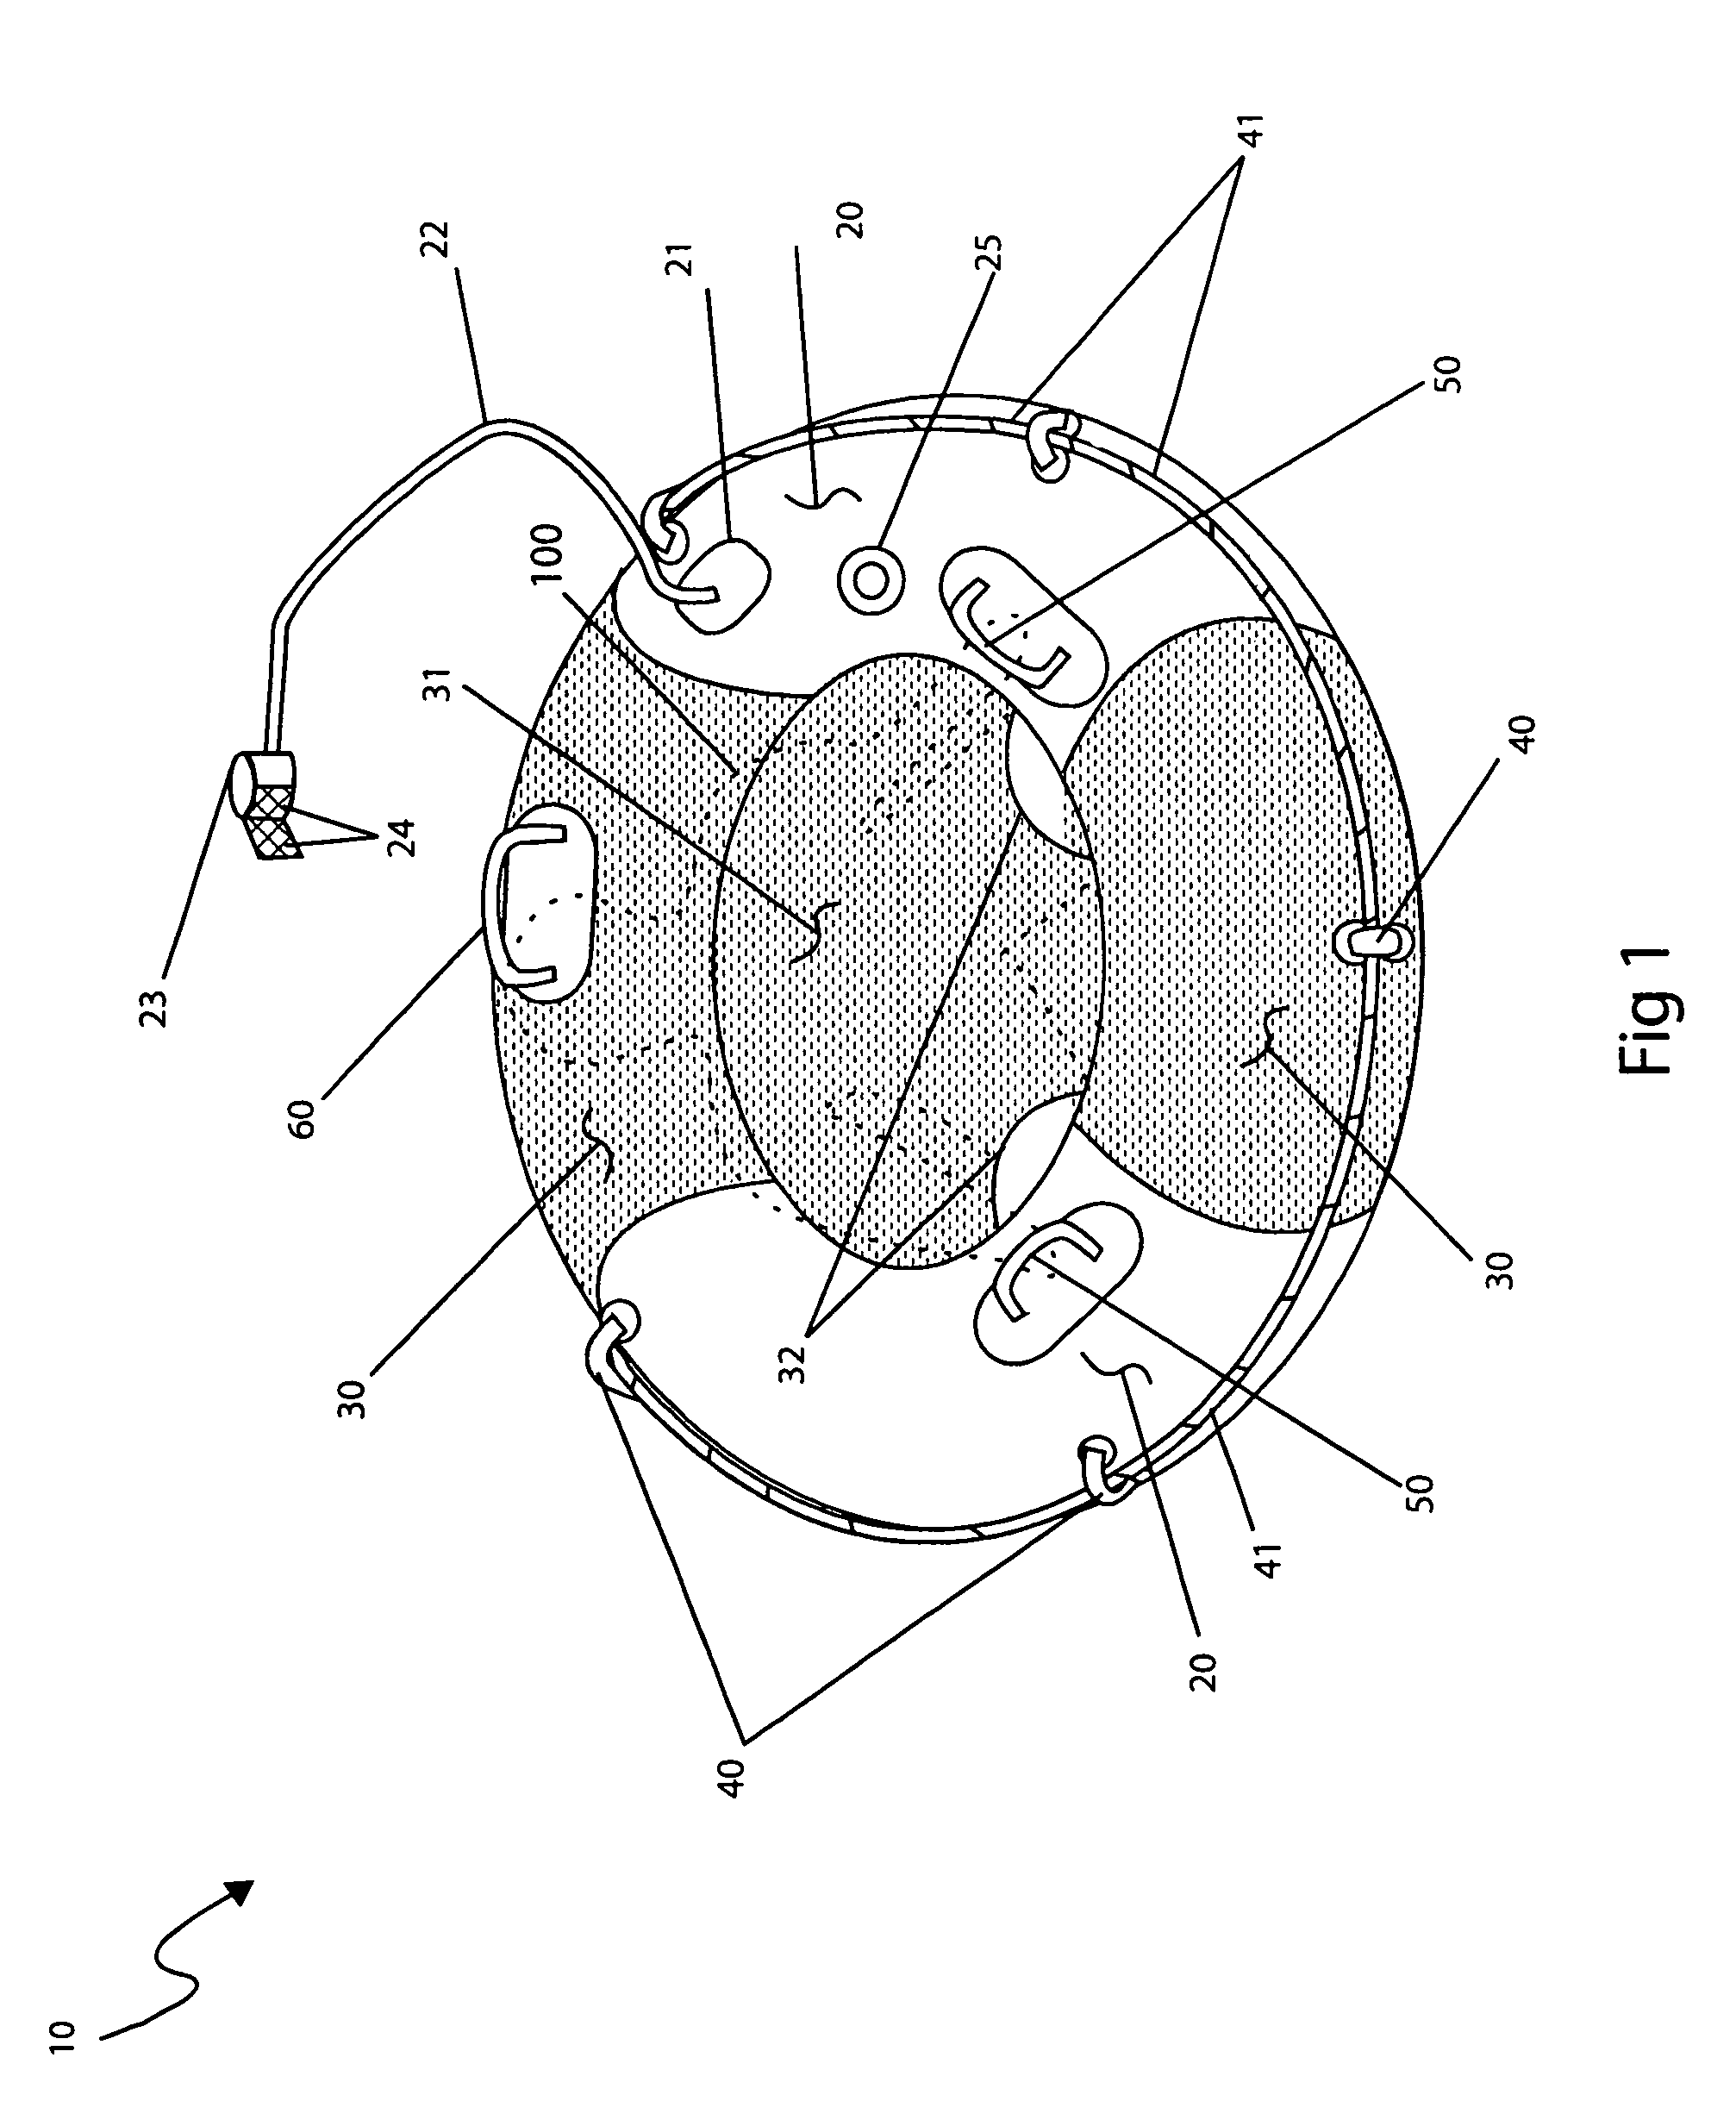 Tethered flotation device and method of use thereof